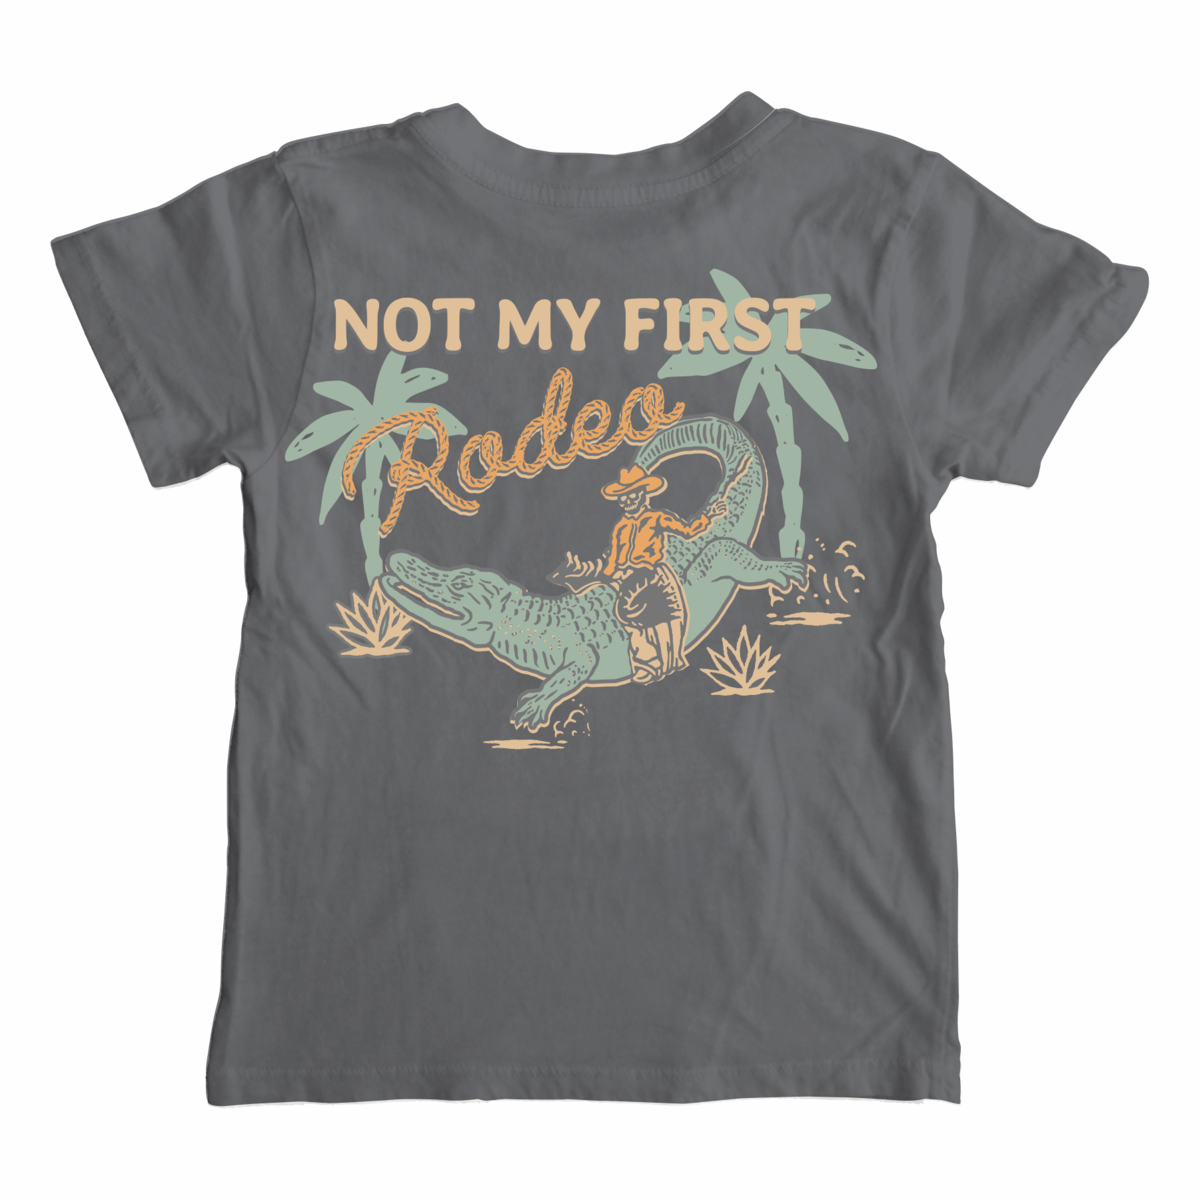 Not My First Rodeo Graphic Tee - Vintage Black